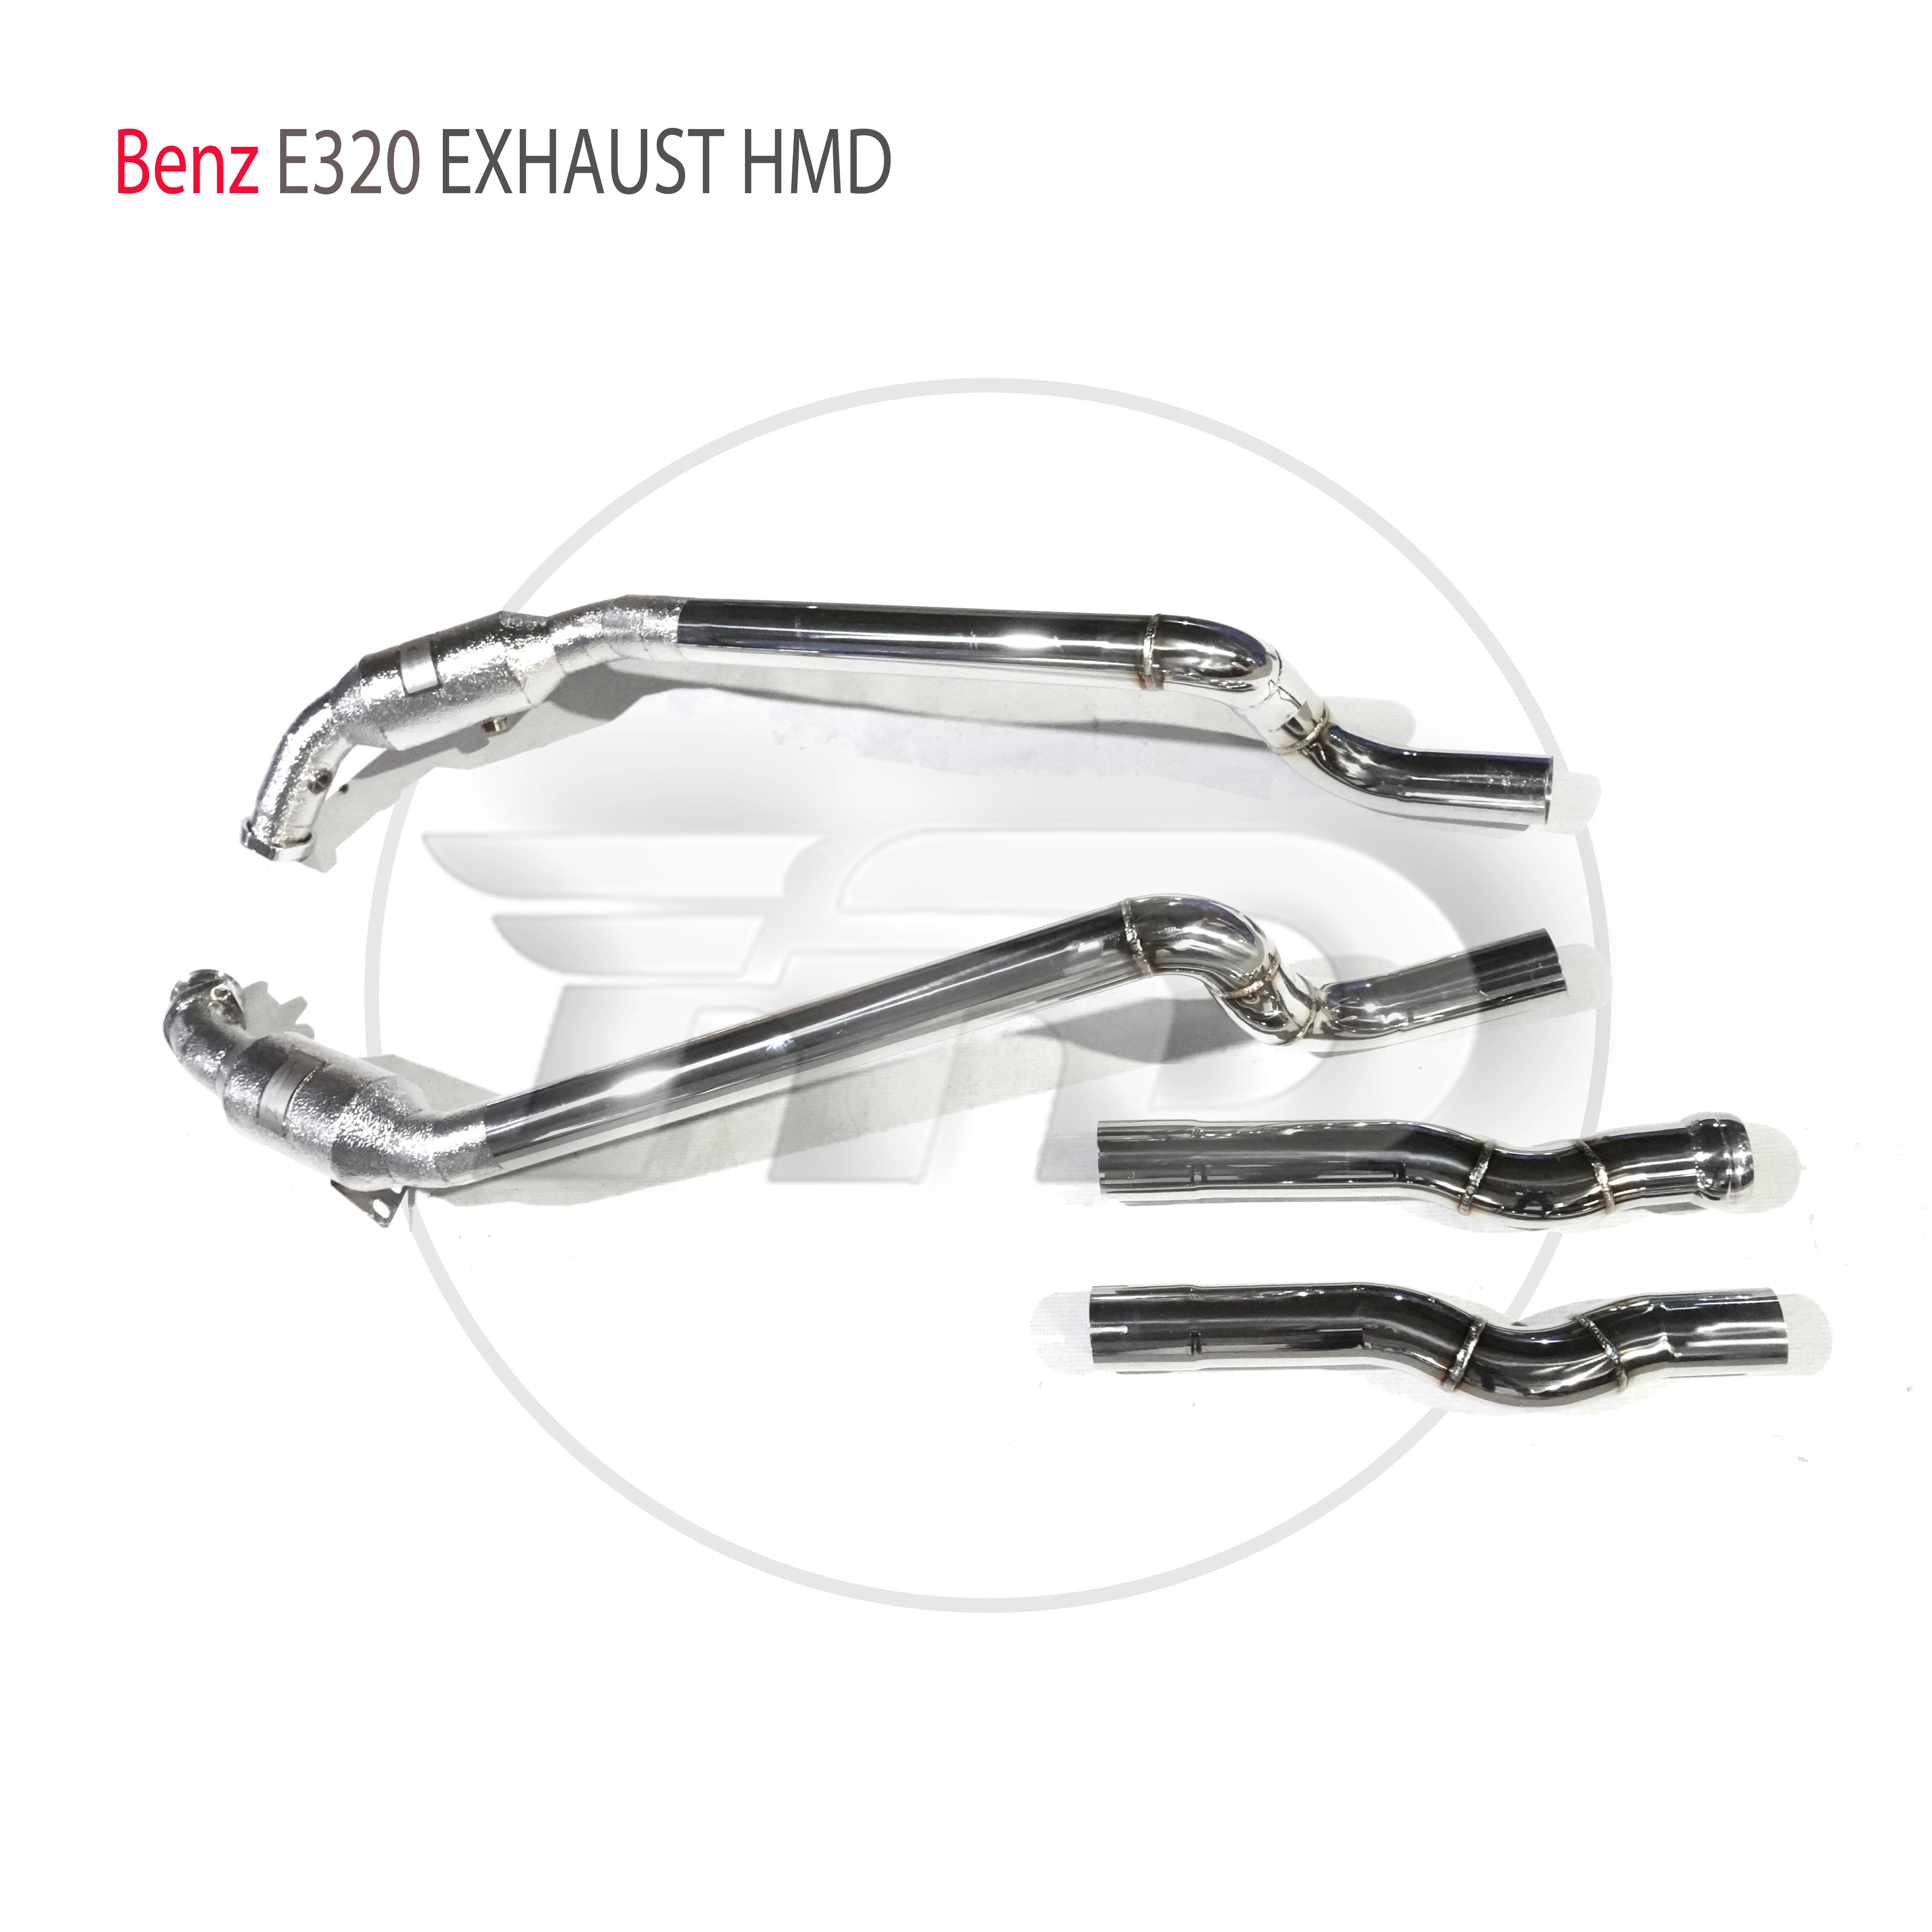 

HMD Exhaust Manifold Downpipe for Benz E320 3.0T Car Accessories With Catalytic Header Without Cat High Flow